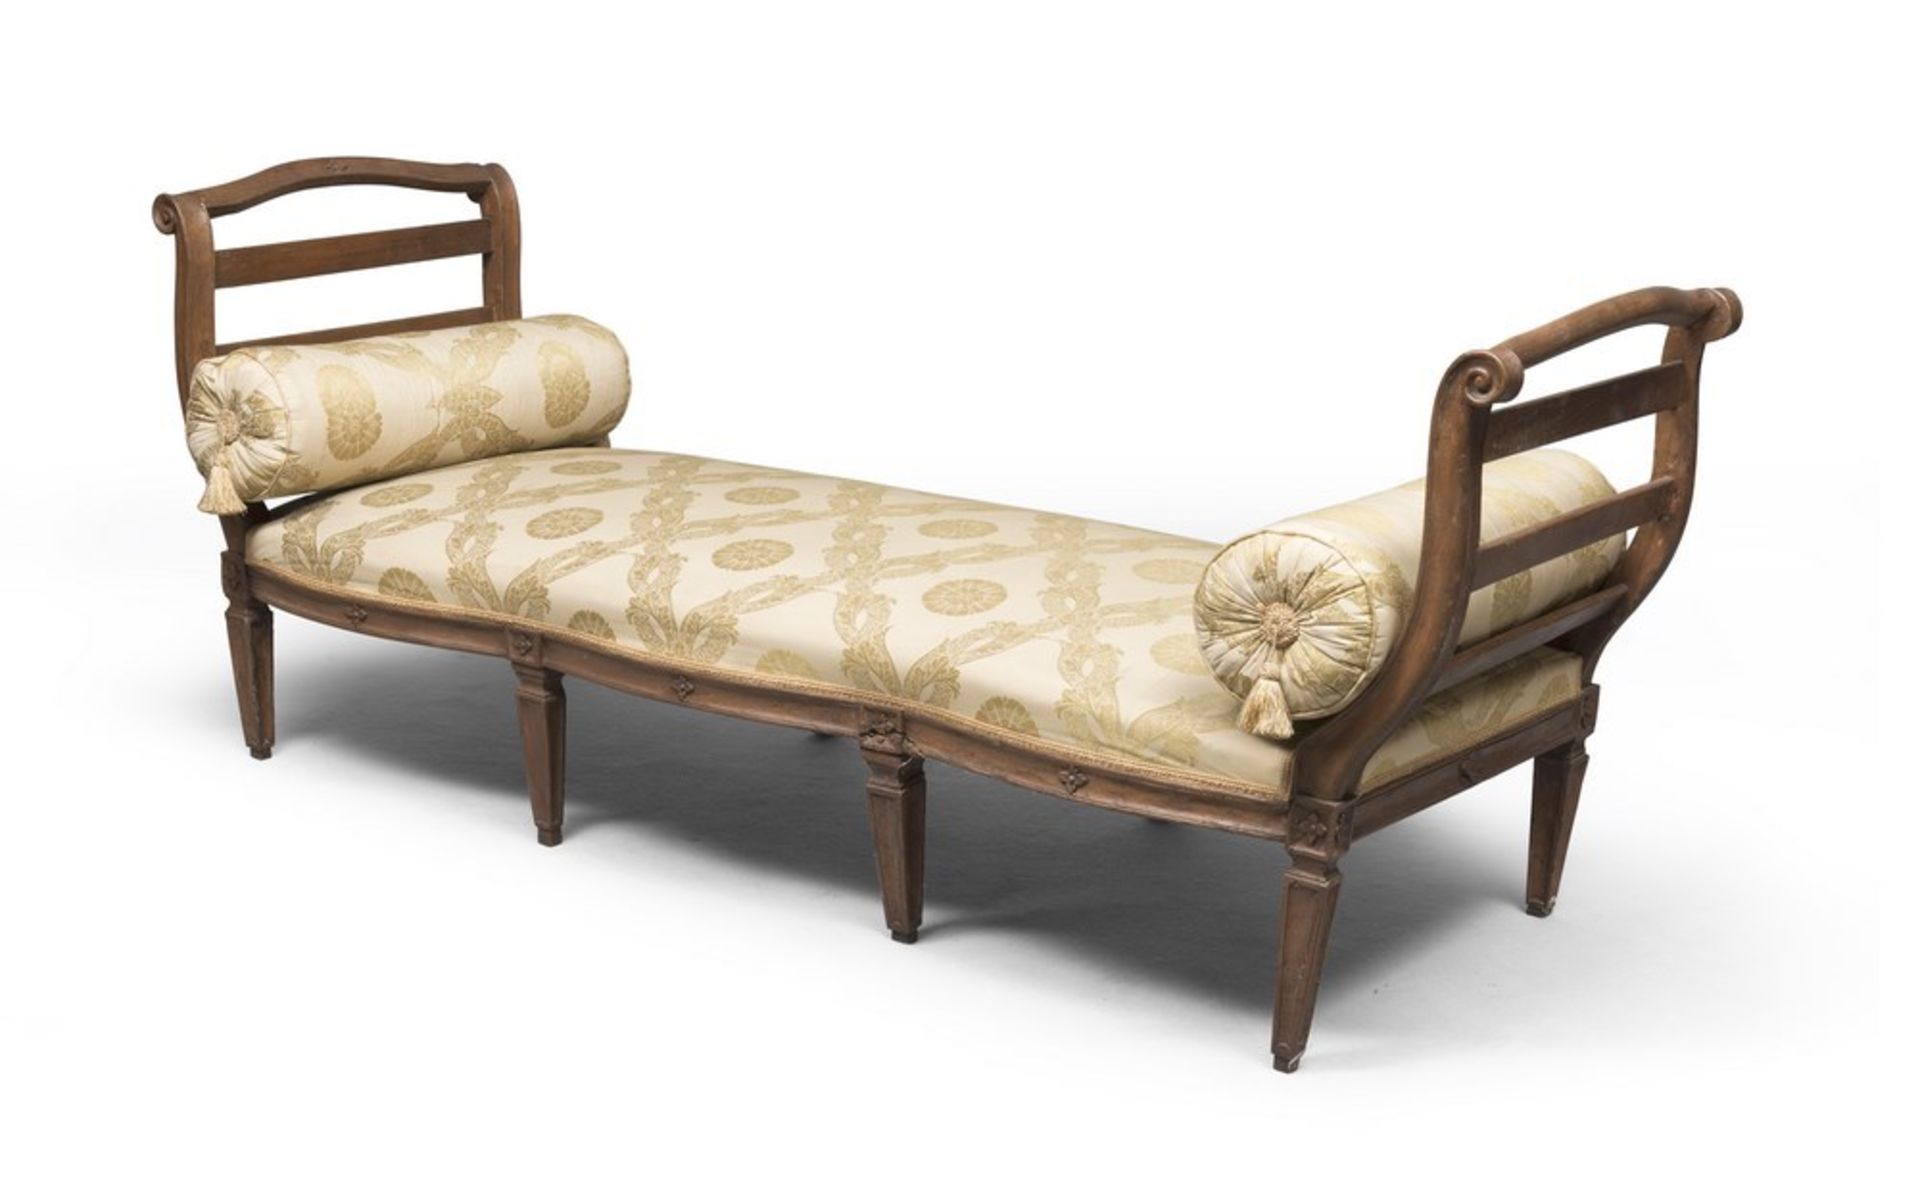 WOODEN SOFA, NORTH ITALY 18TH CENTURY with curved finishing line armrests. Tripartite hips with